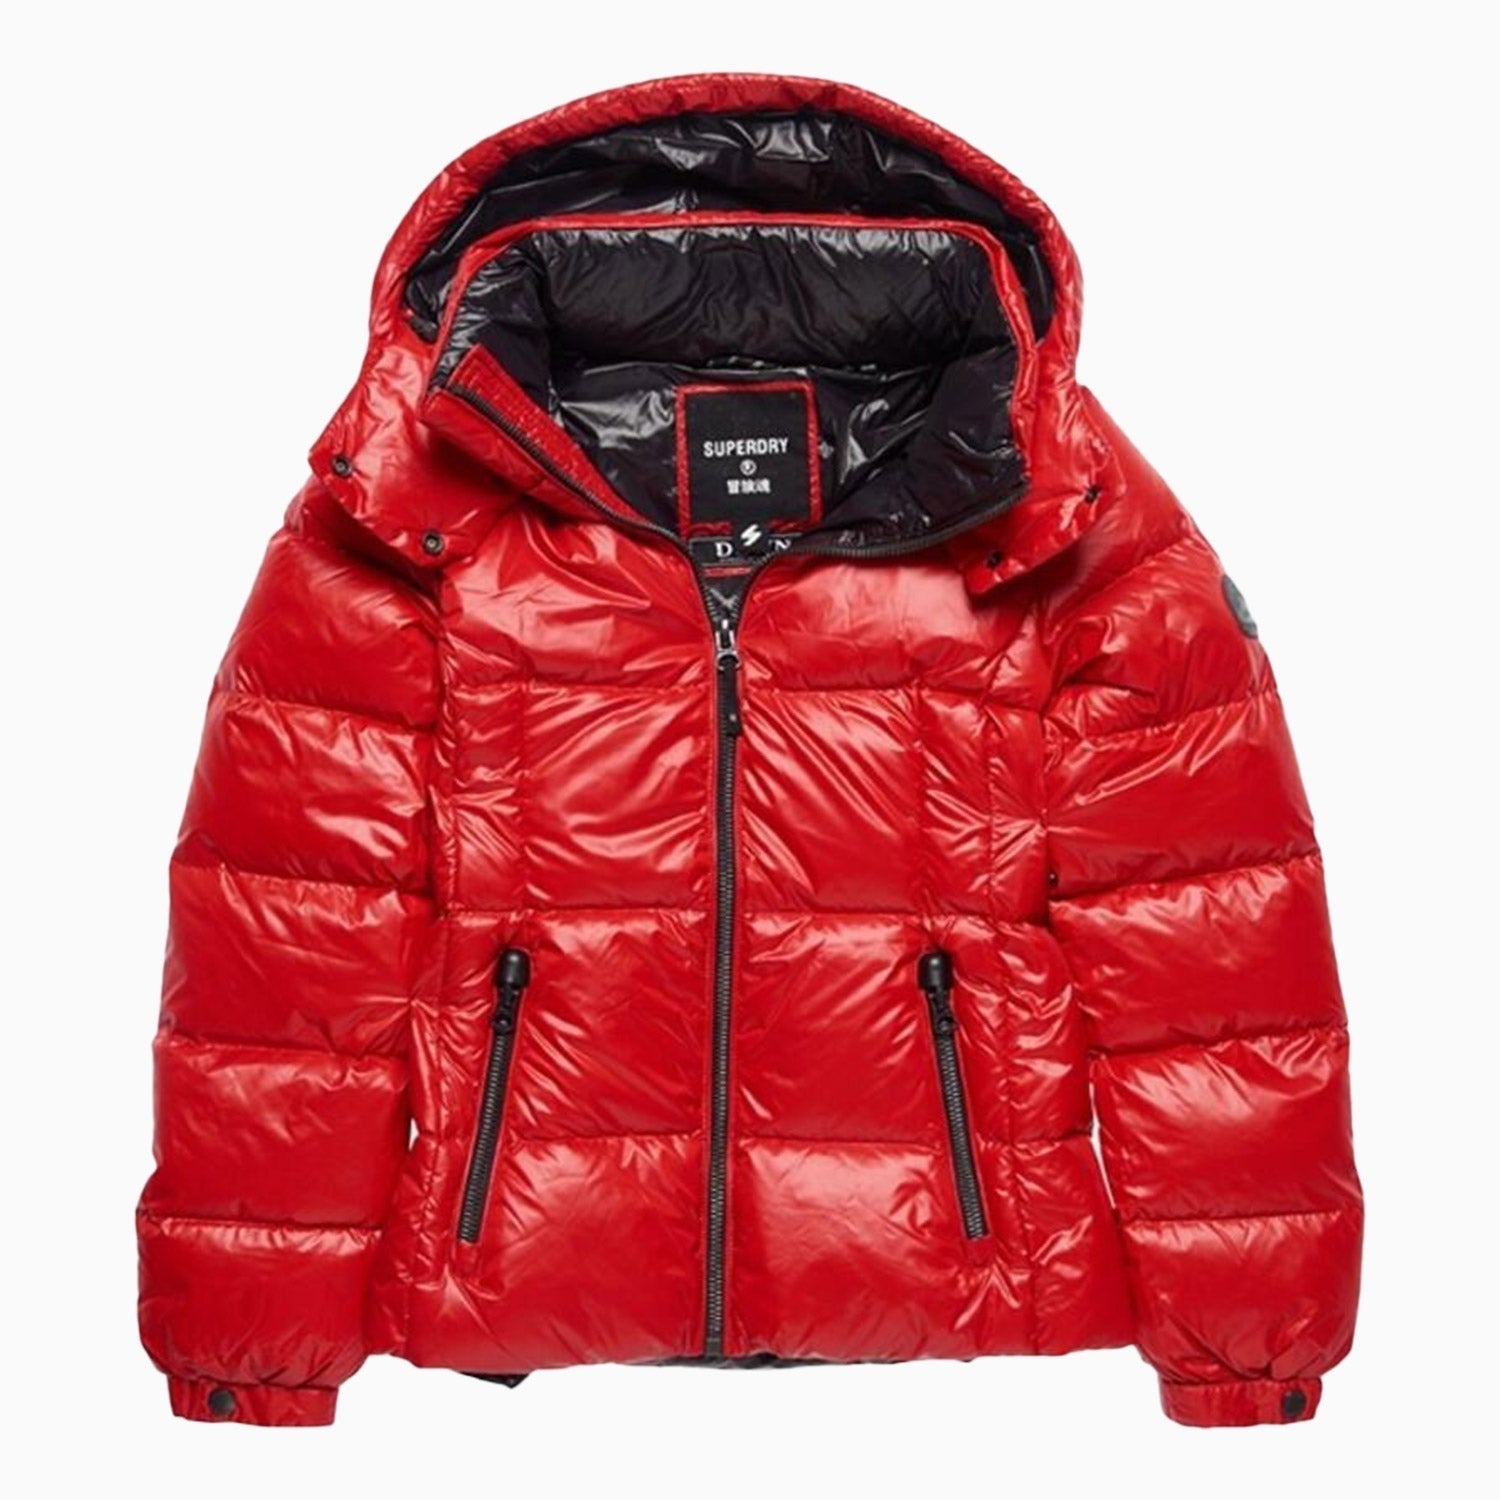 Superdry Women's Mountain Hooded Down Puffer Jacket - Color: Red, Eclipse Navy - Tops and Bottoms USA -